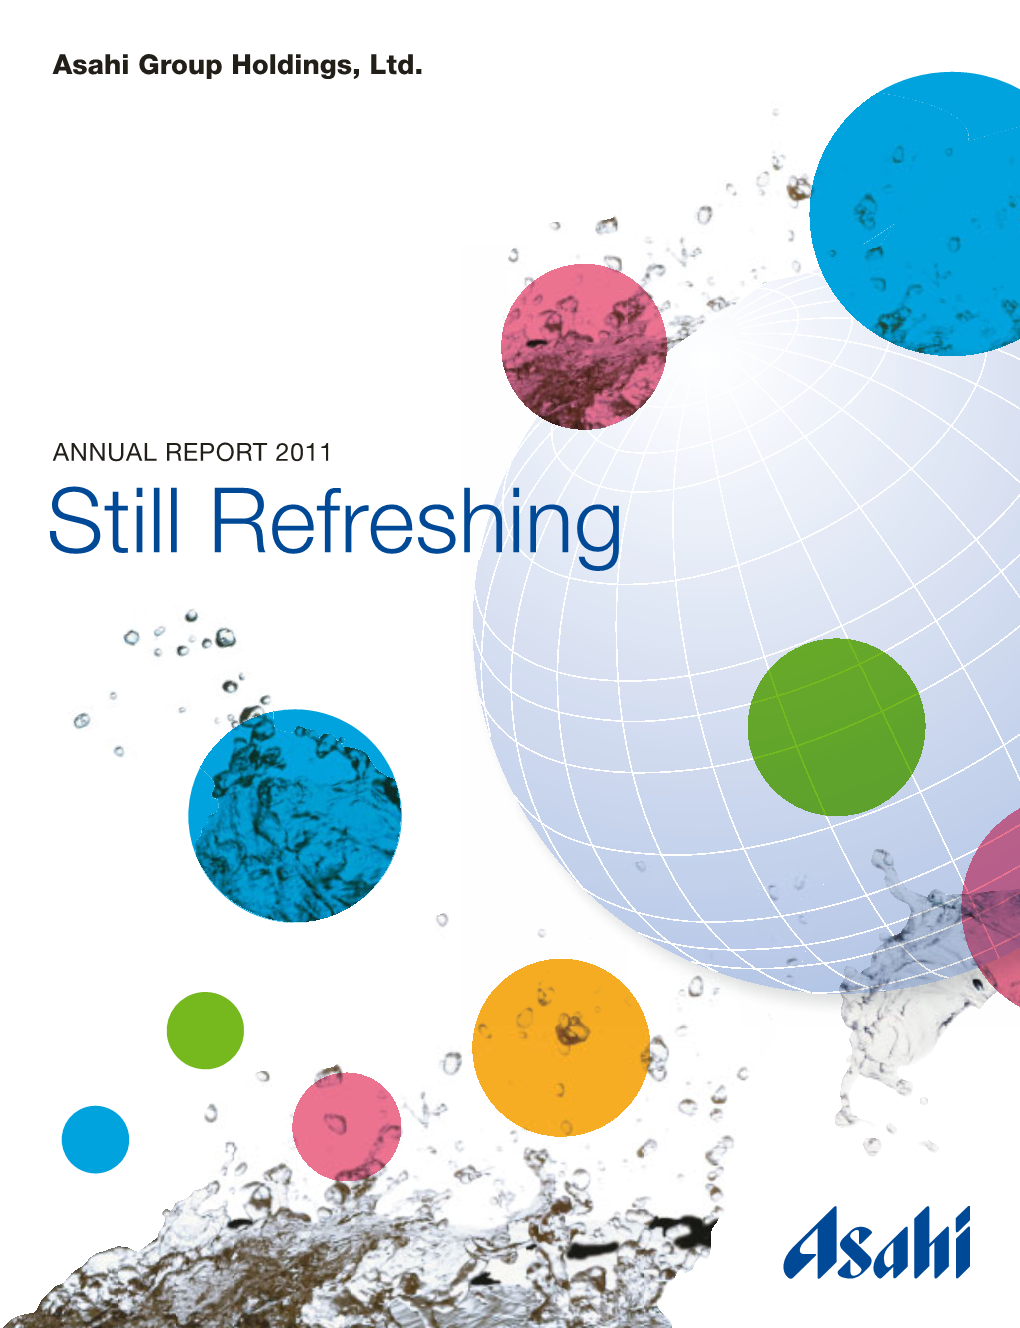 ANNUAL REPORT 2011 Still Refreshing CORPORATE PHILOSOPHY